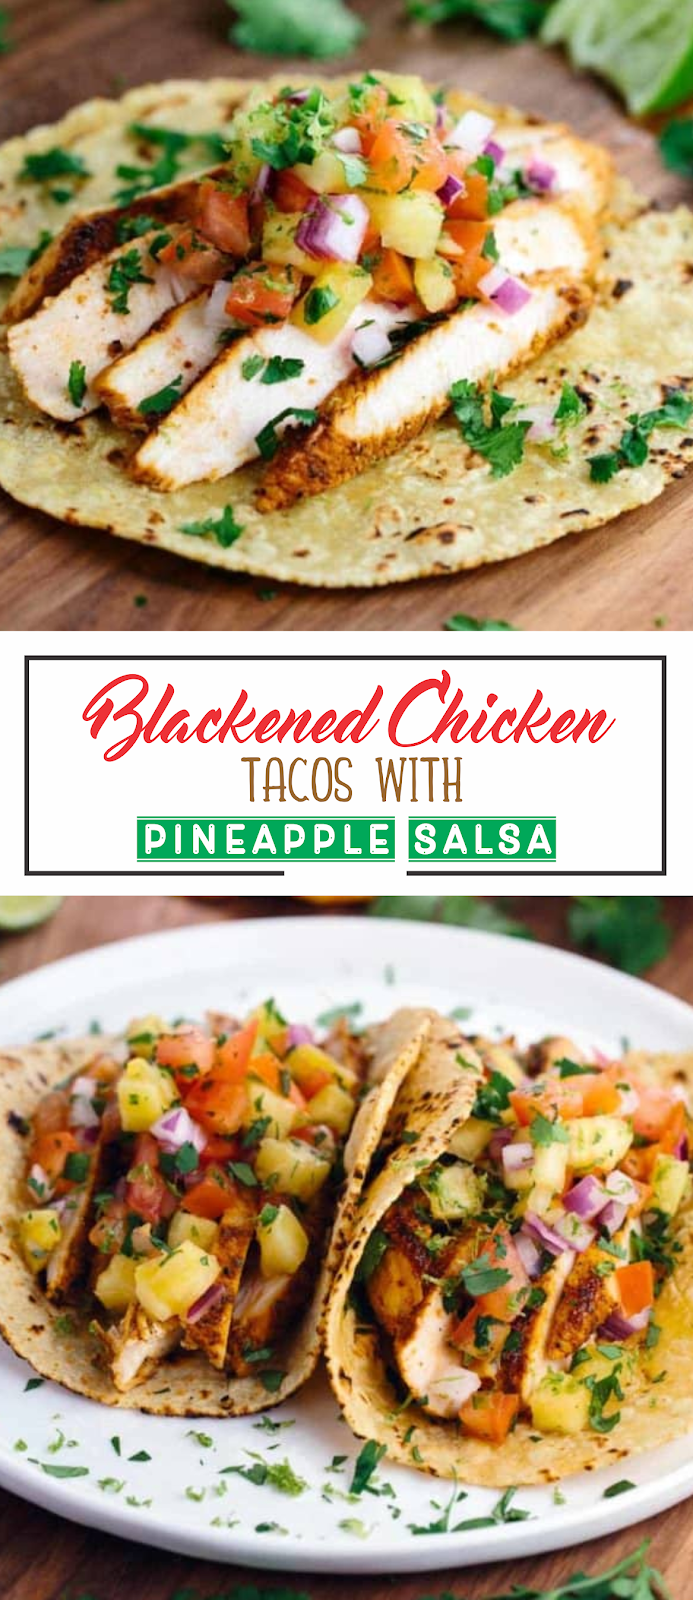 Blackened Chicken Tacos with Pineapple Salsa | Show You Recipes